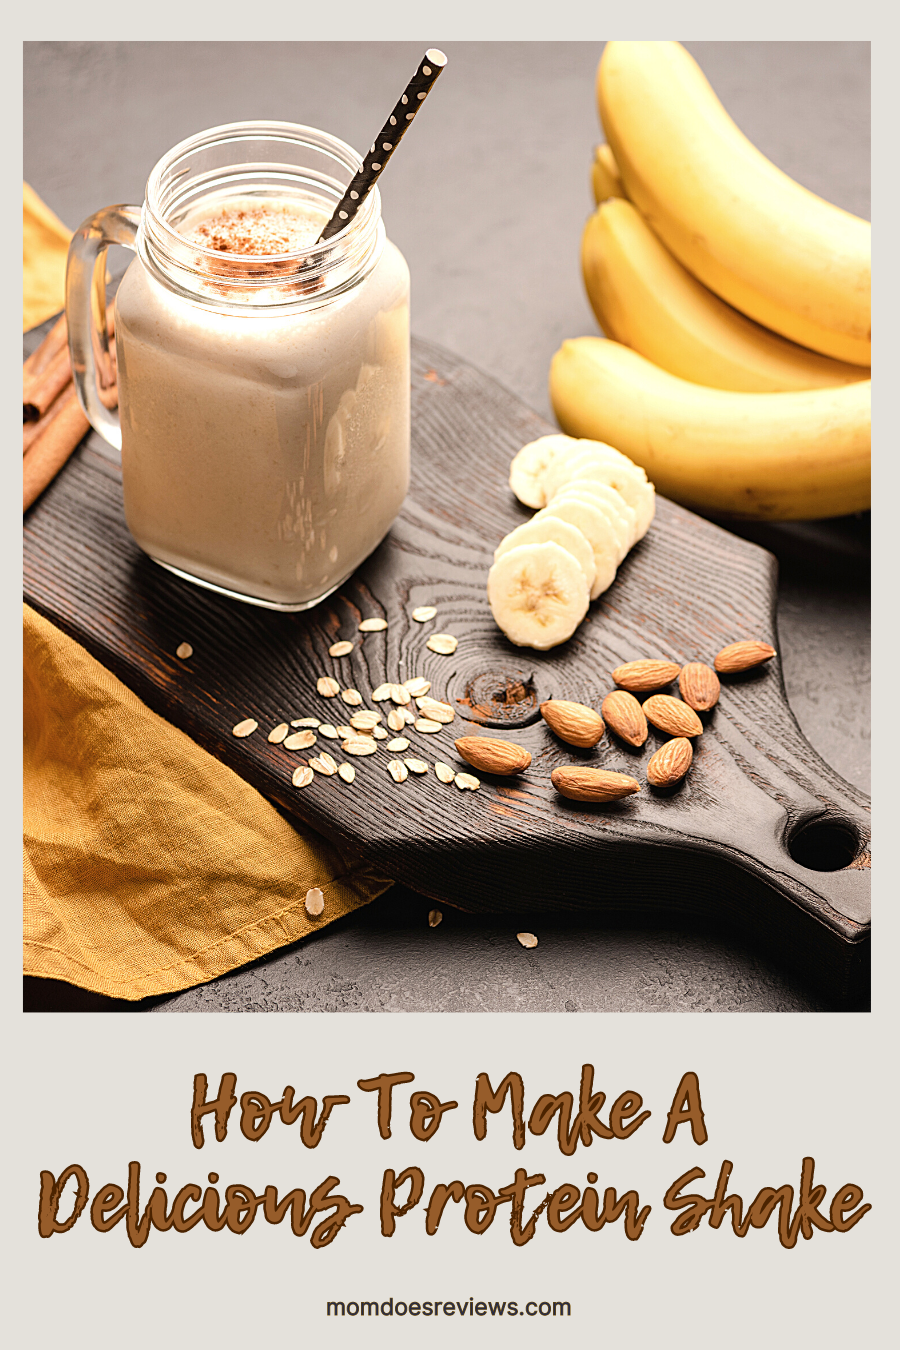 How To Make A Delicious Protein Shake